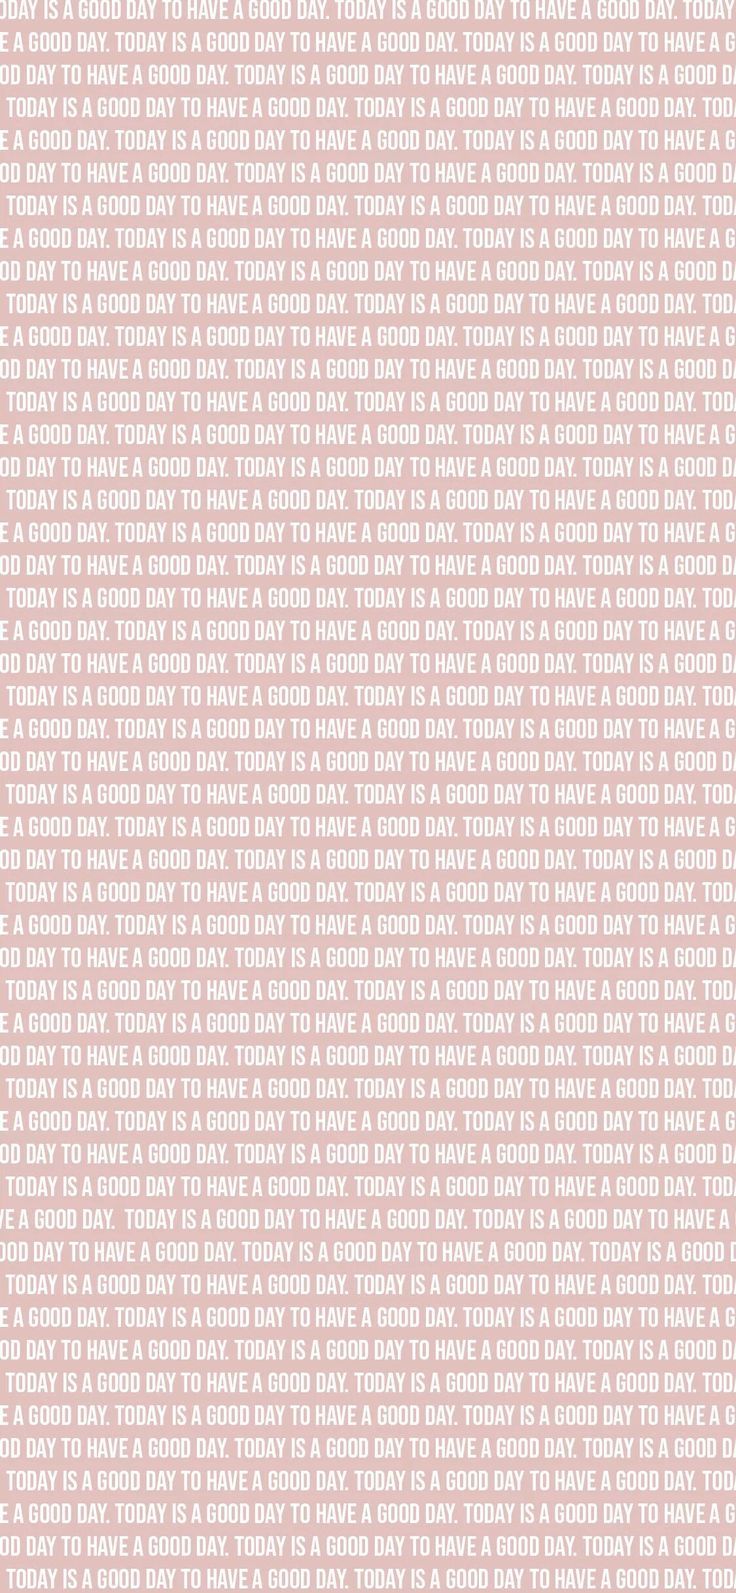 Today is a good day to have a good day. iPhone background wallpaper, Tumblr wallpaper, Cute wallpaper background